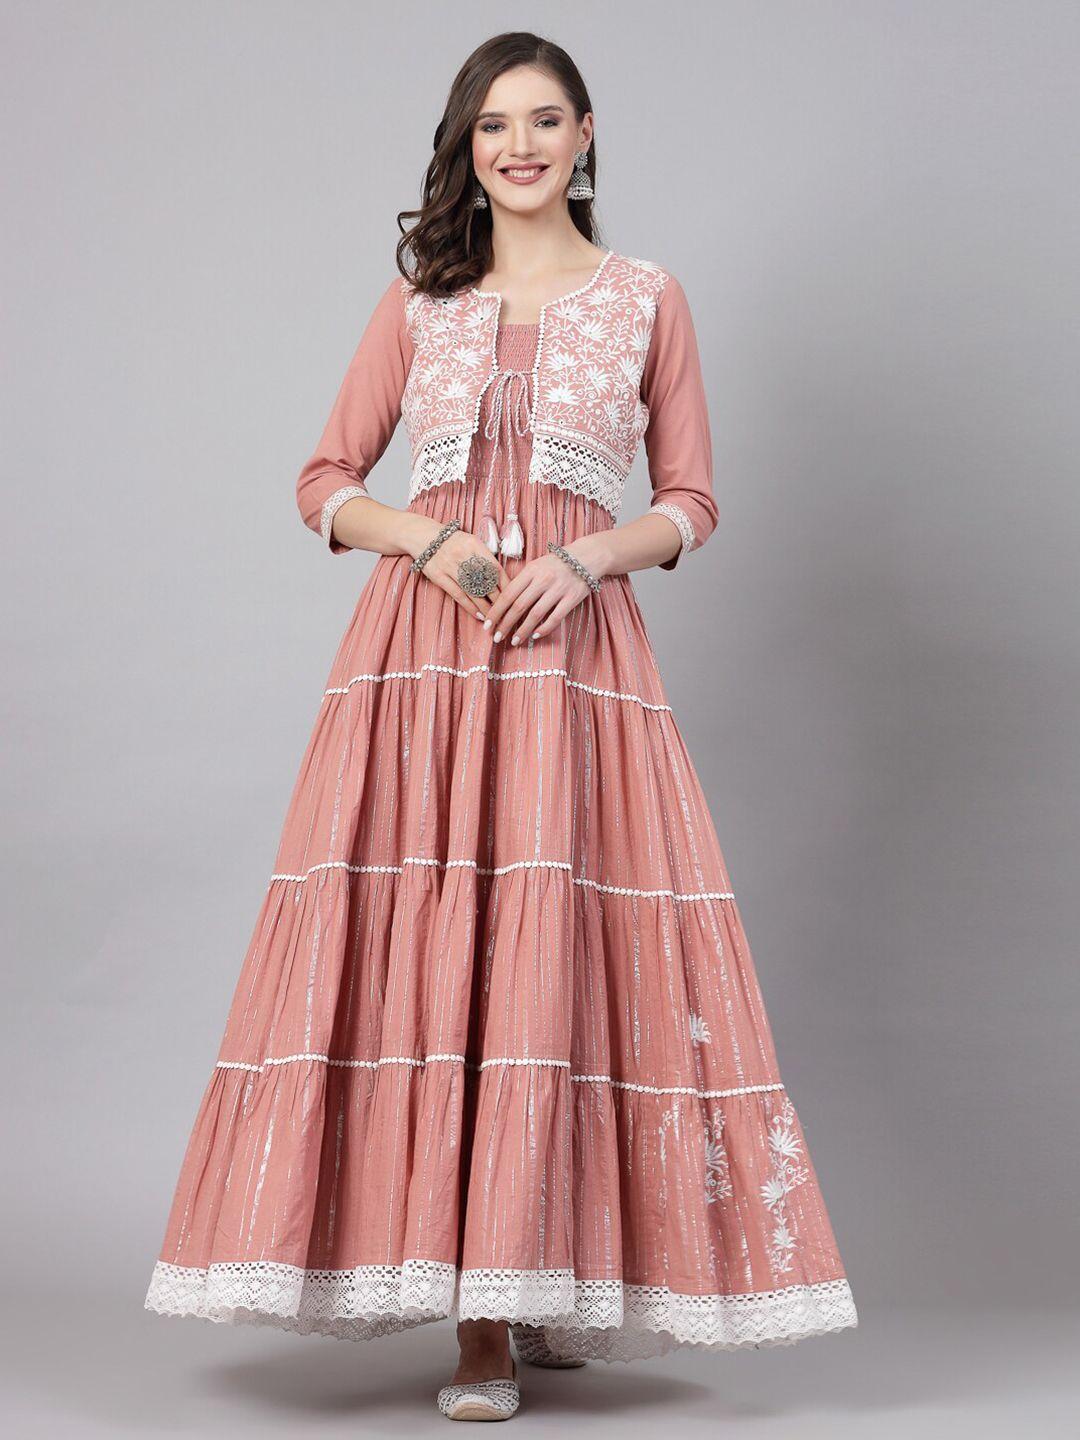 swas floral embroidered cotton smocked tiered fit & flare maxi ethnic dress with jacket